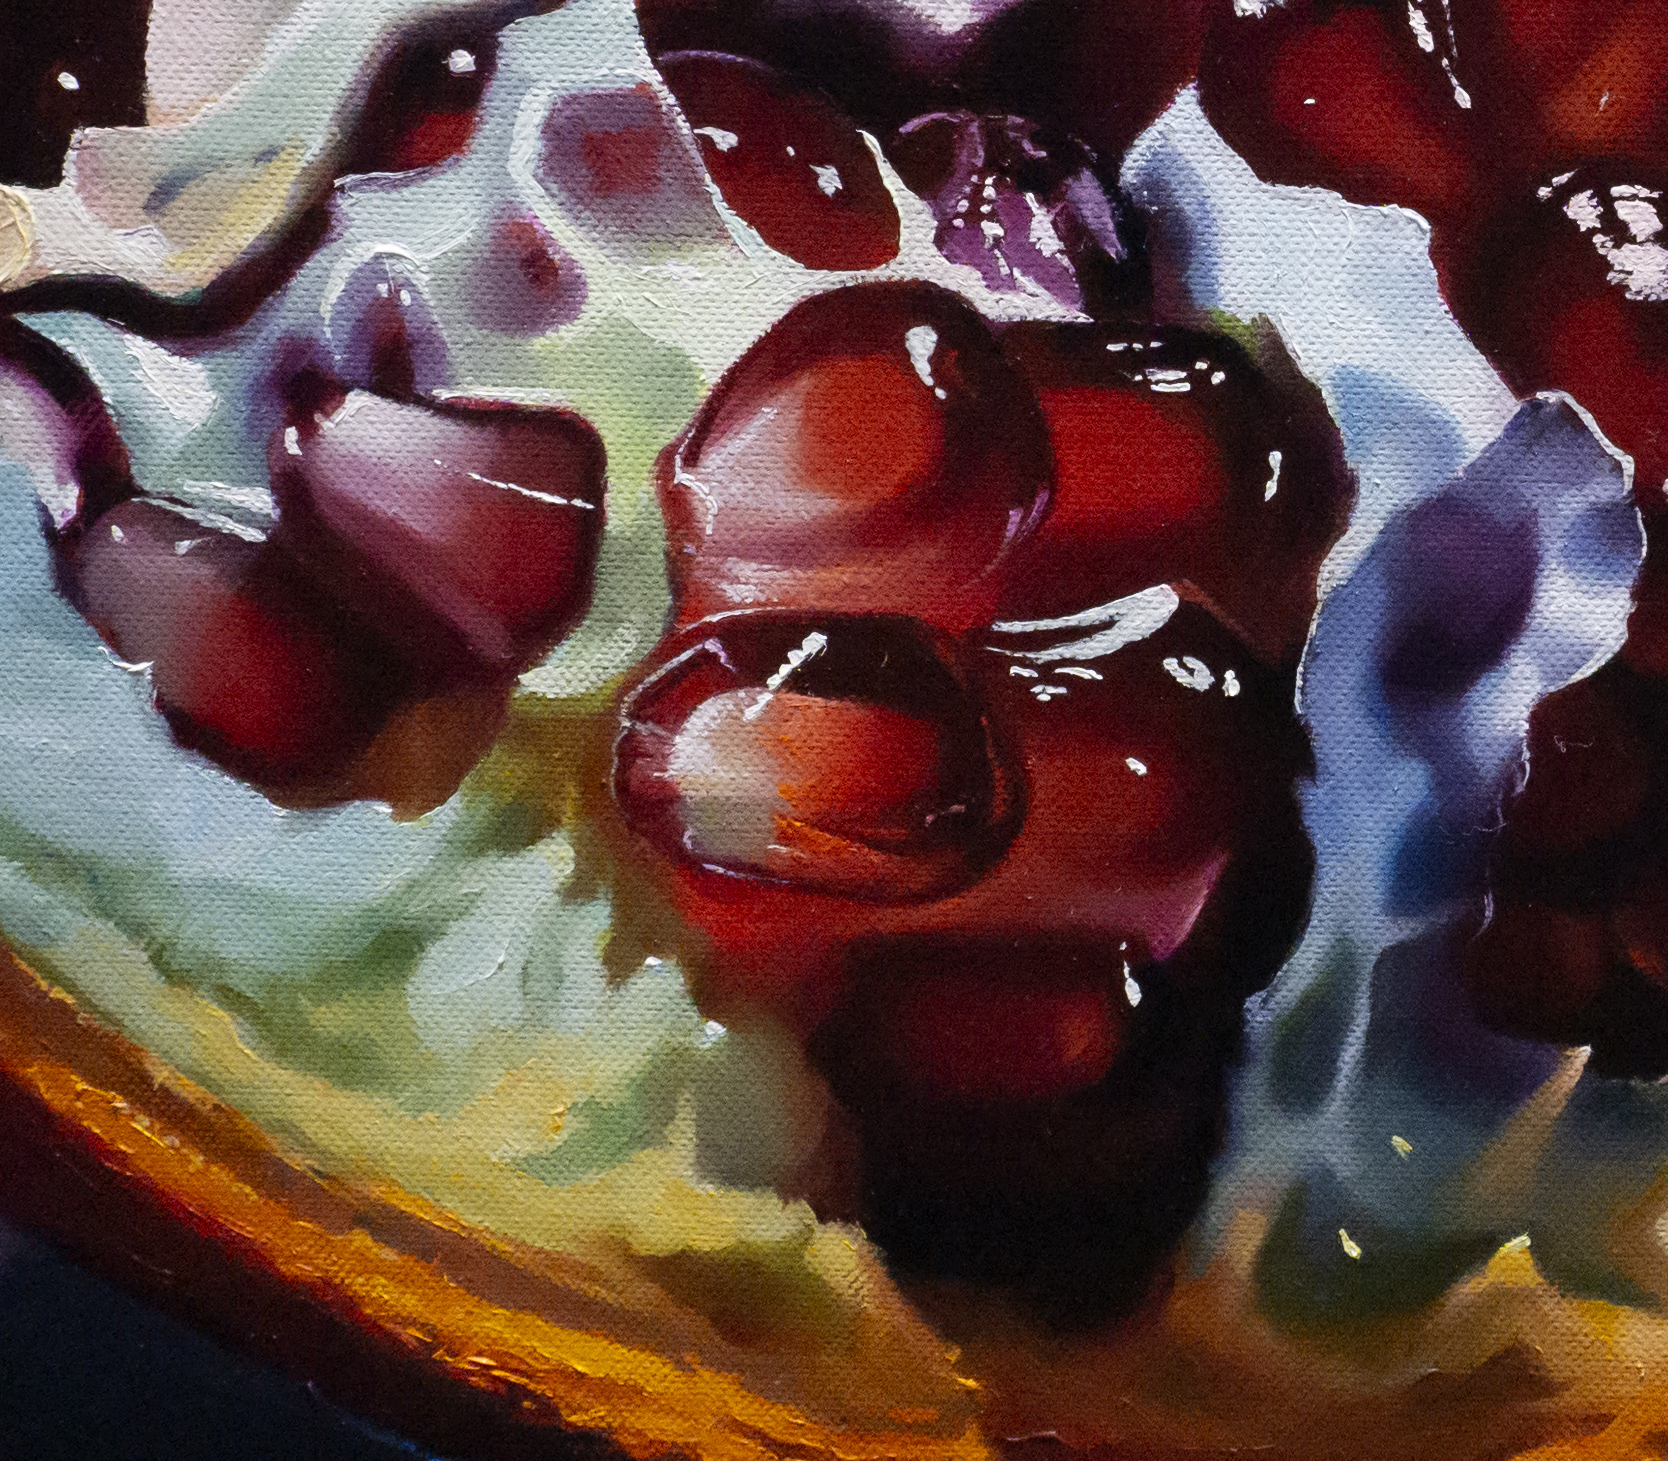 "Between heaven and earth." Still life with pomegranate, painting. Artist Anna Grechina.